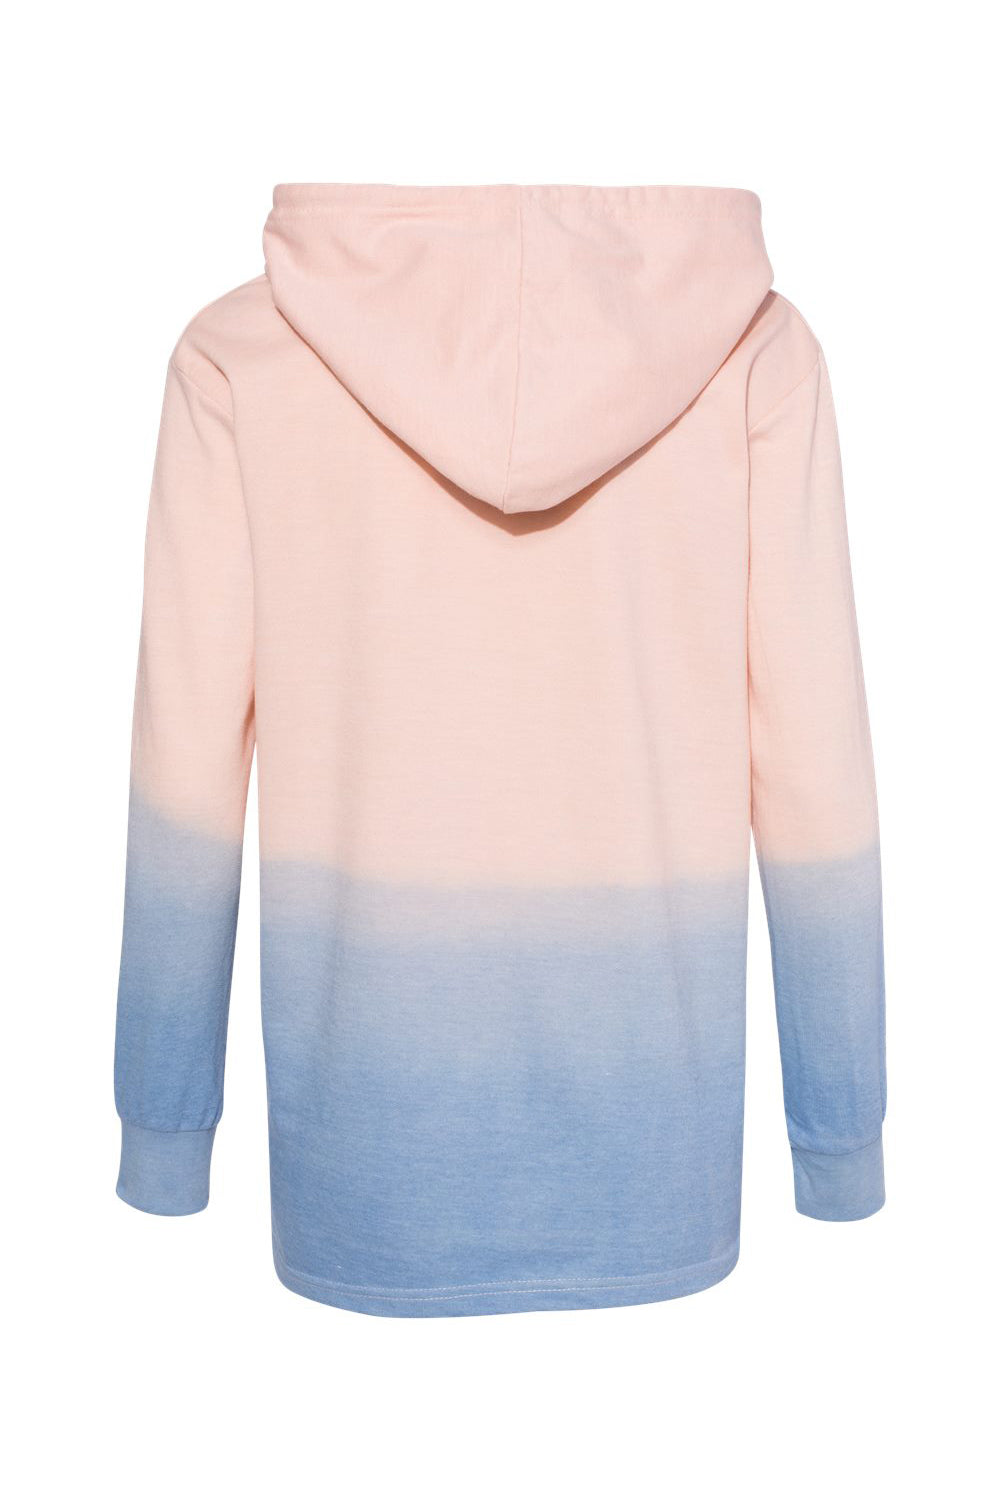 MV Sport W20185 Womens French Terry Ombre Hooded Sweatshirt Hoodie Cameo Pink/Stonewash Blue Flat Back